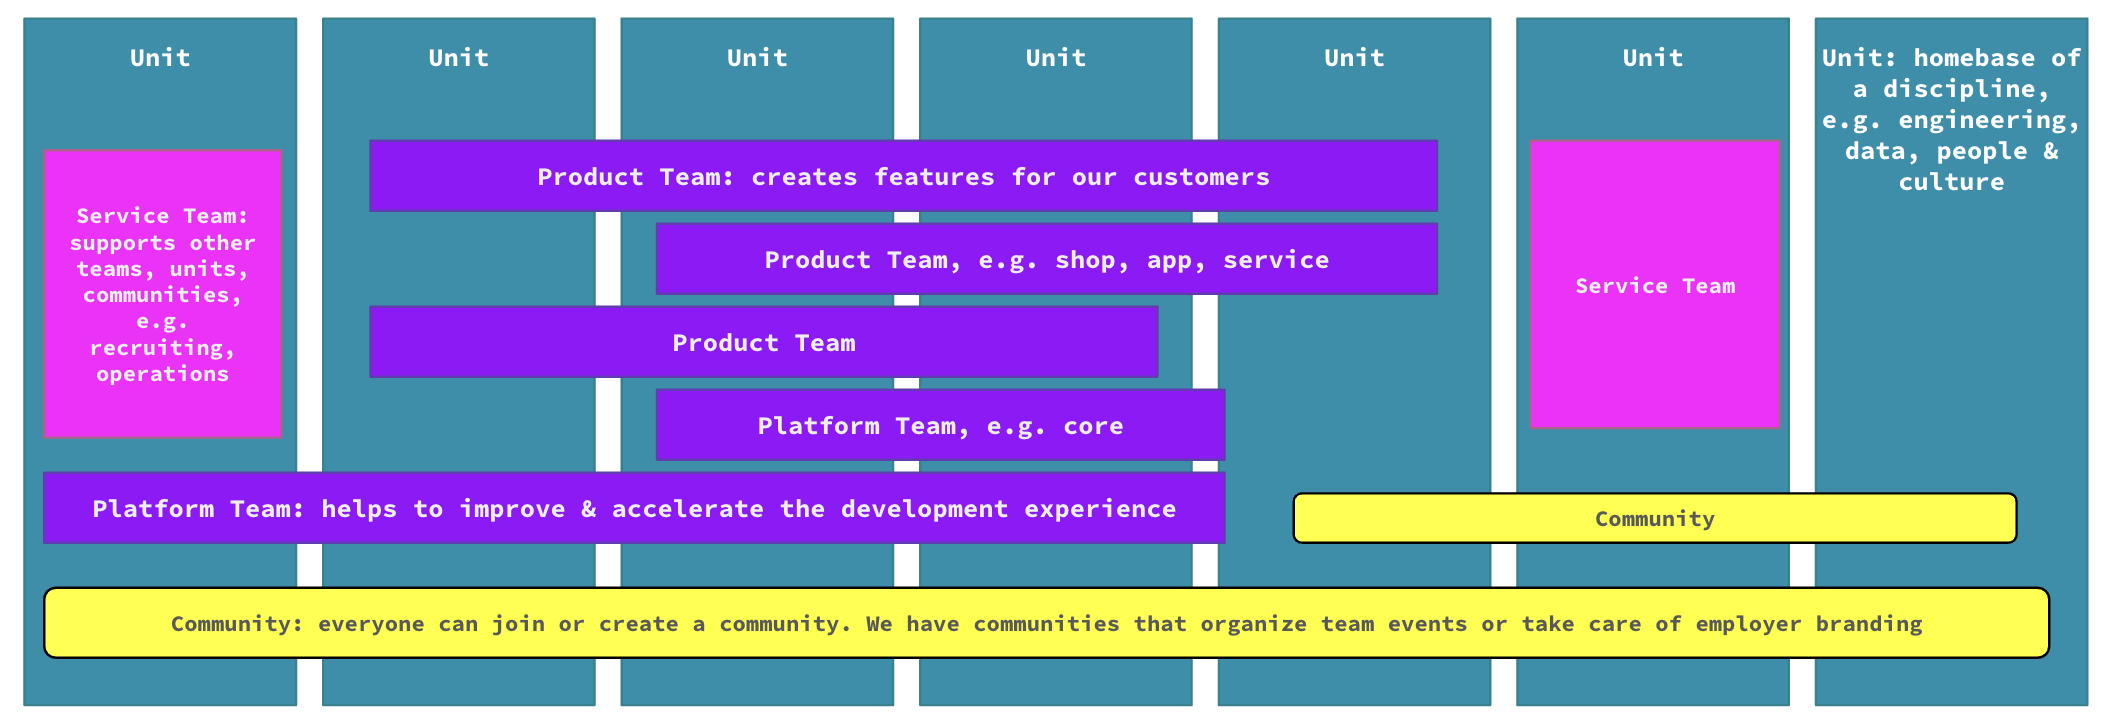 Operational structure of thomann.io